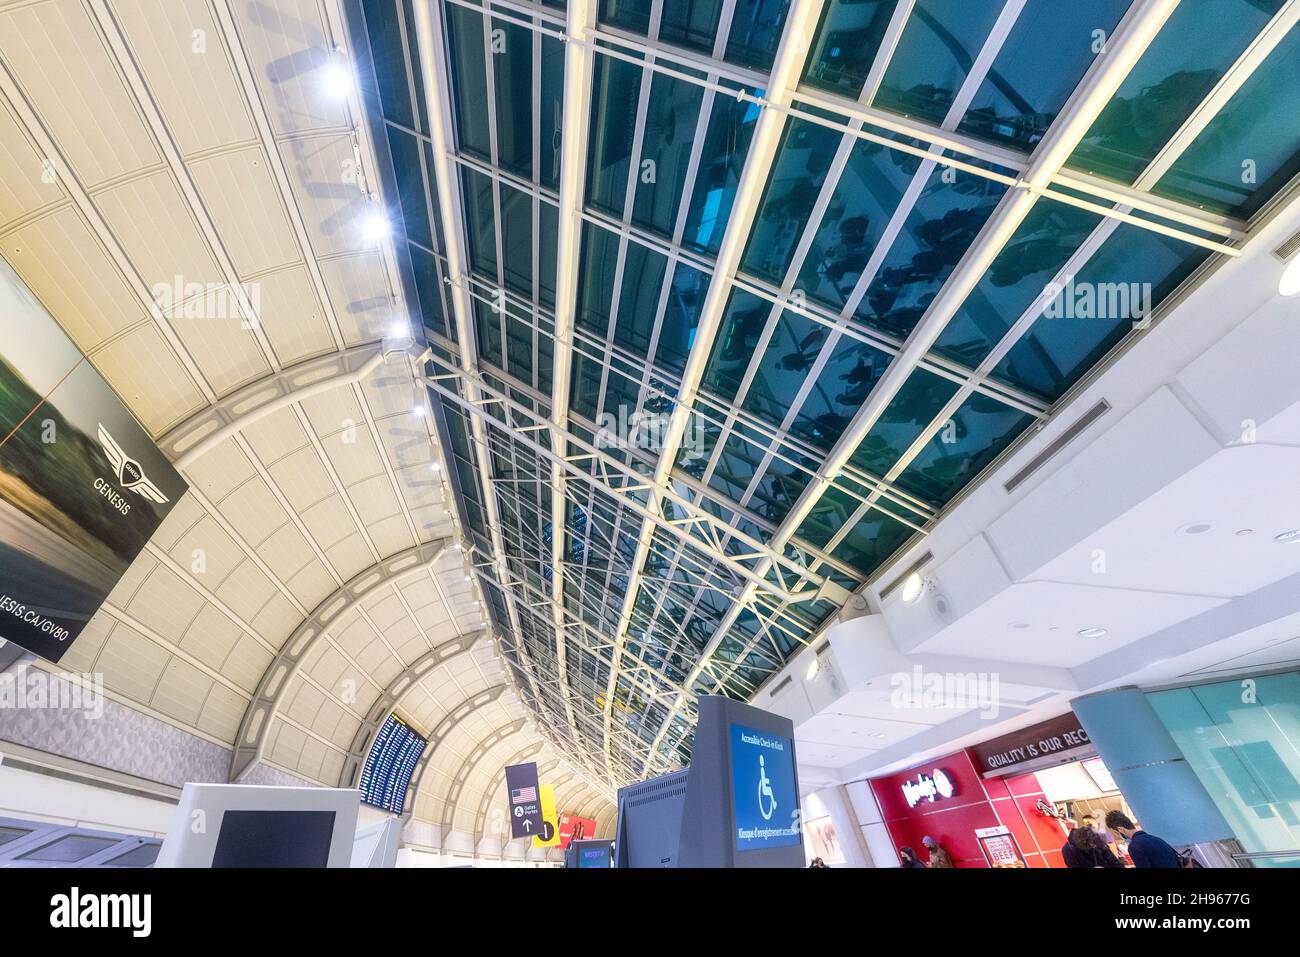 Modern glass ceiling and interior architecture of the Terminal 3 at Pearson International Airport. Dec. 4, 2021 Stock Photo